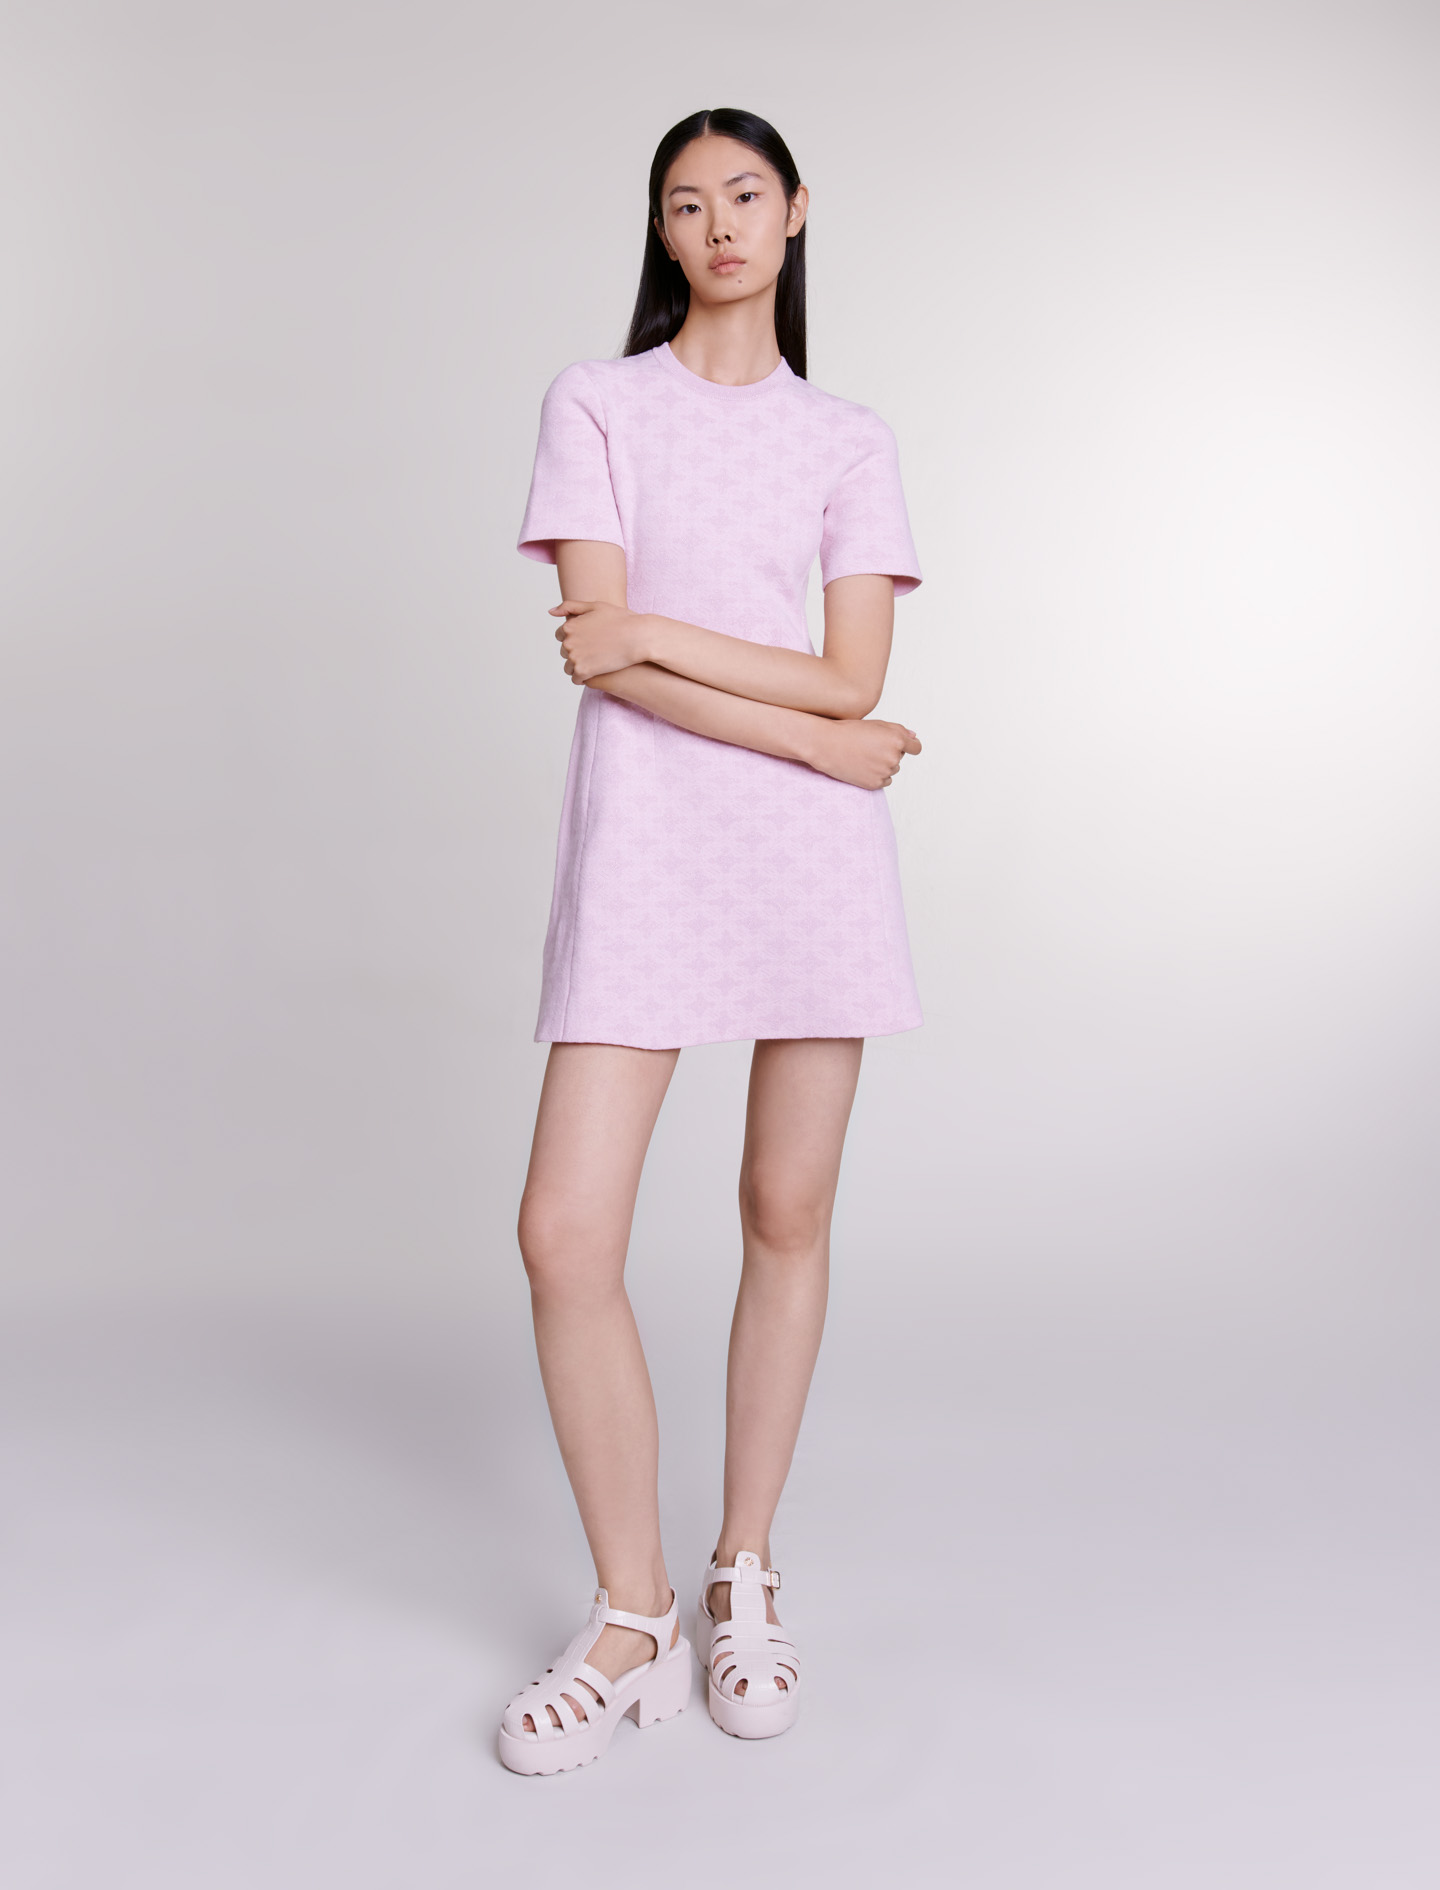 Maje Woman's polyamide, Jacquard knit short dress for Spring/Summer, in color Pale Pink / Red